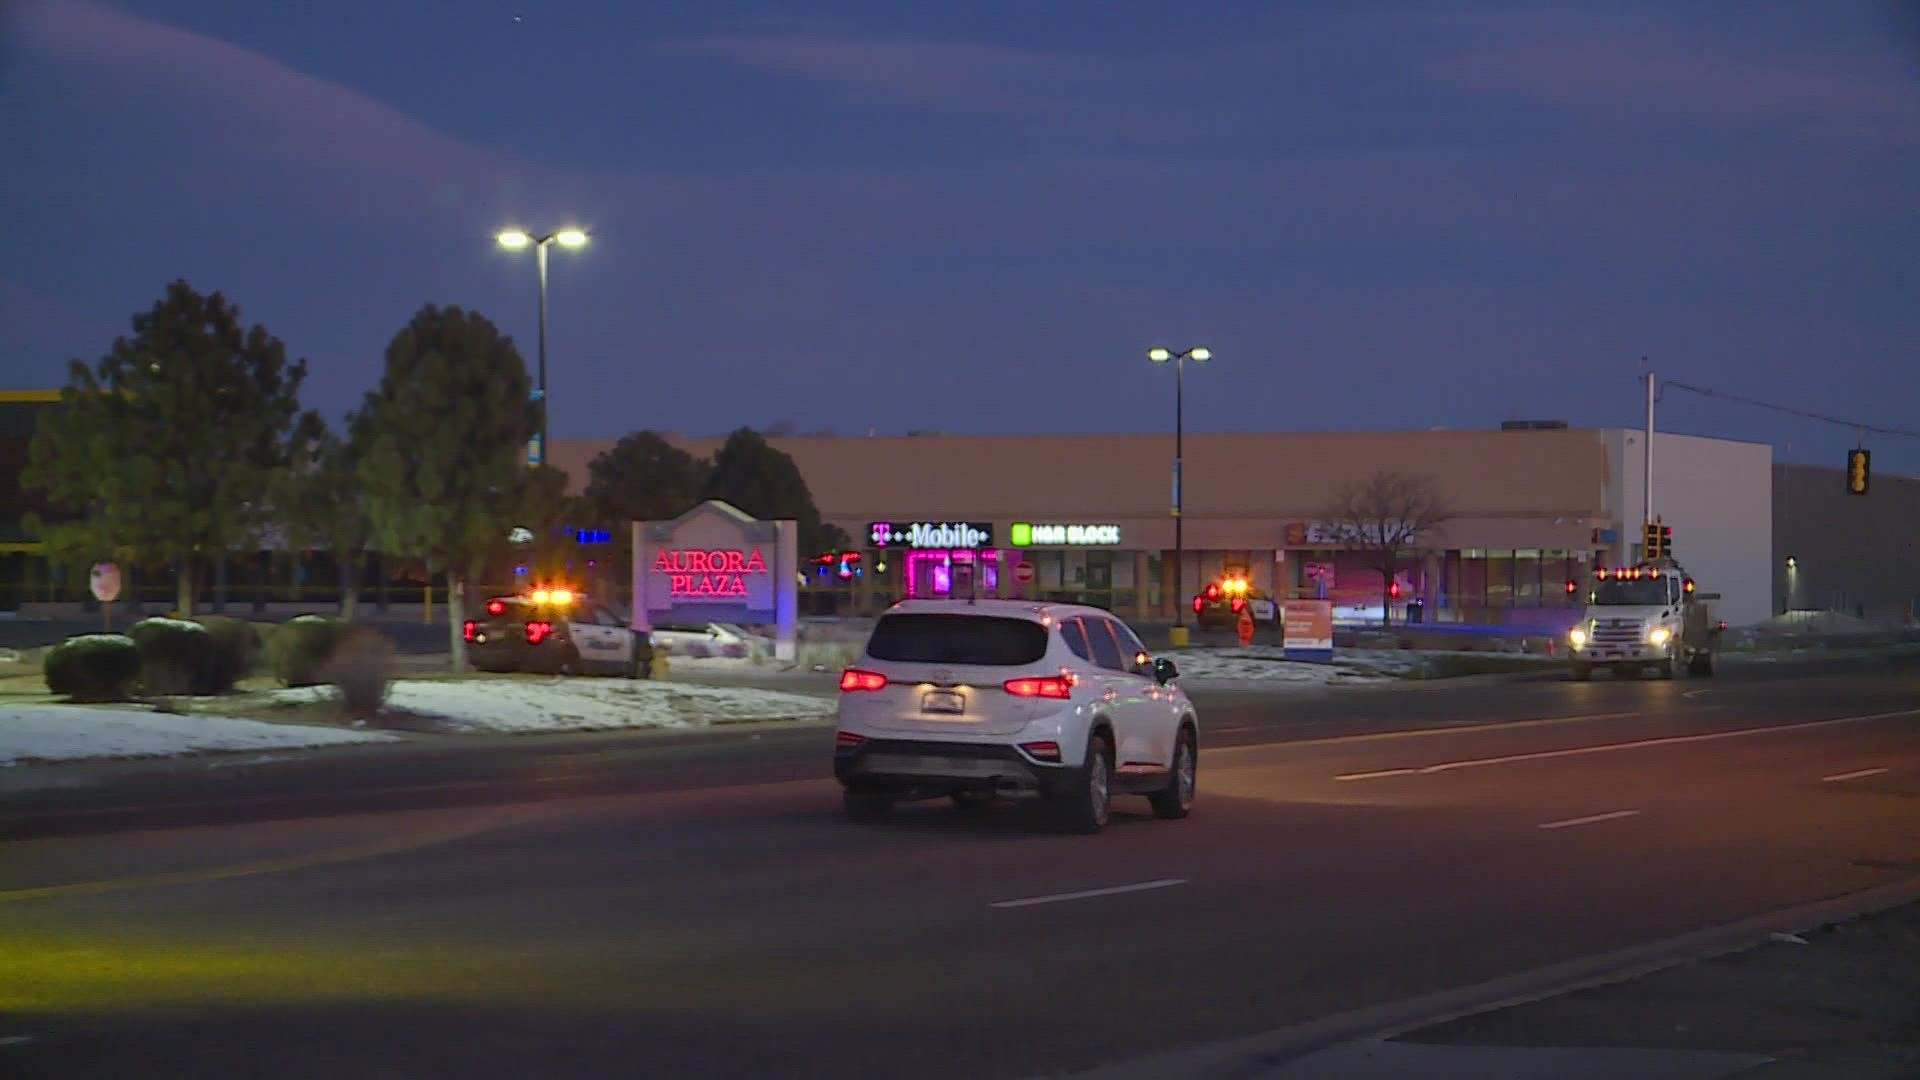 No officers were struck by gunfire, but four police cars were hit. A $10,000 reward is offered for information leading to an arrest, Aurora Police said.